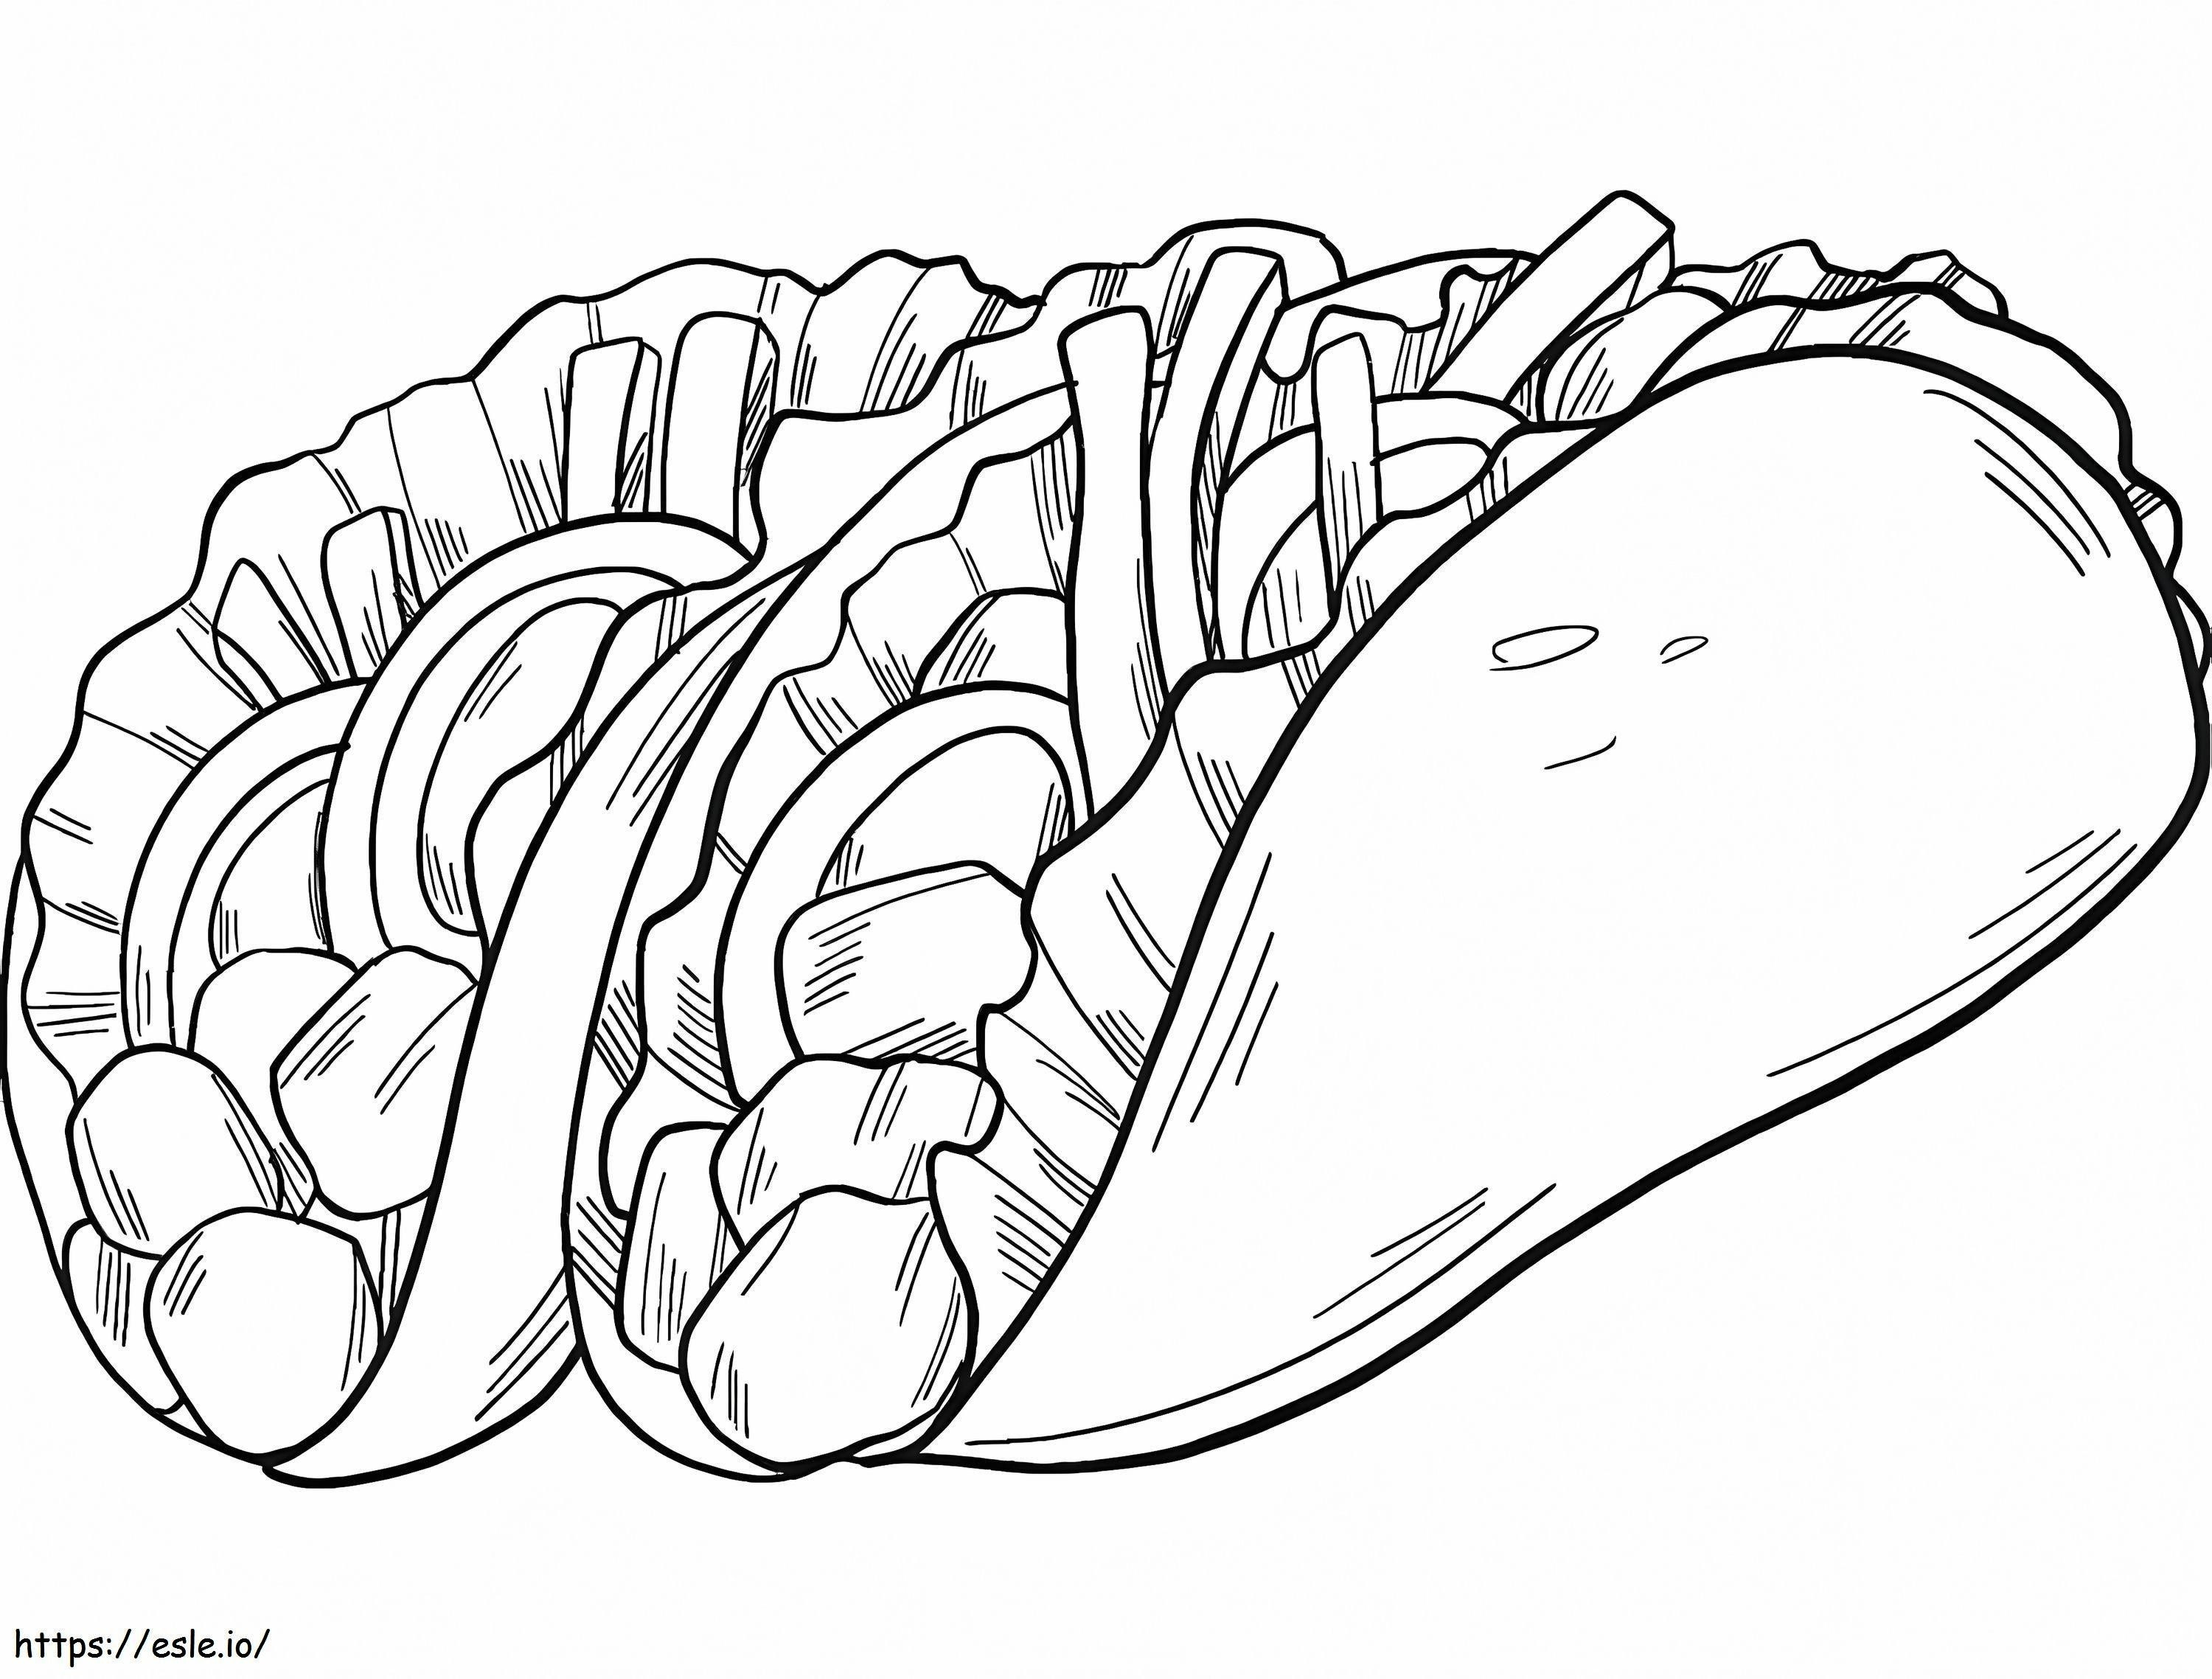 Two Tacos coloring page